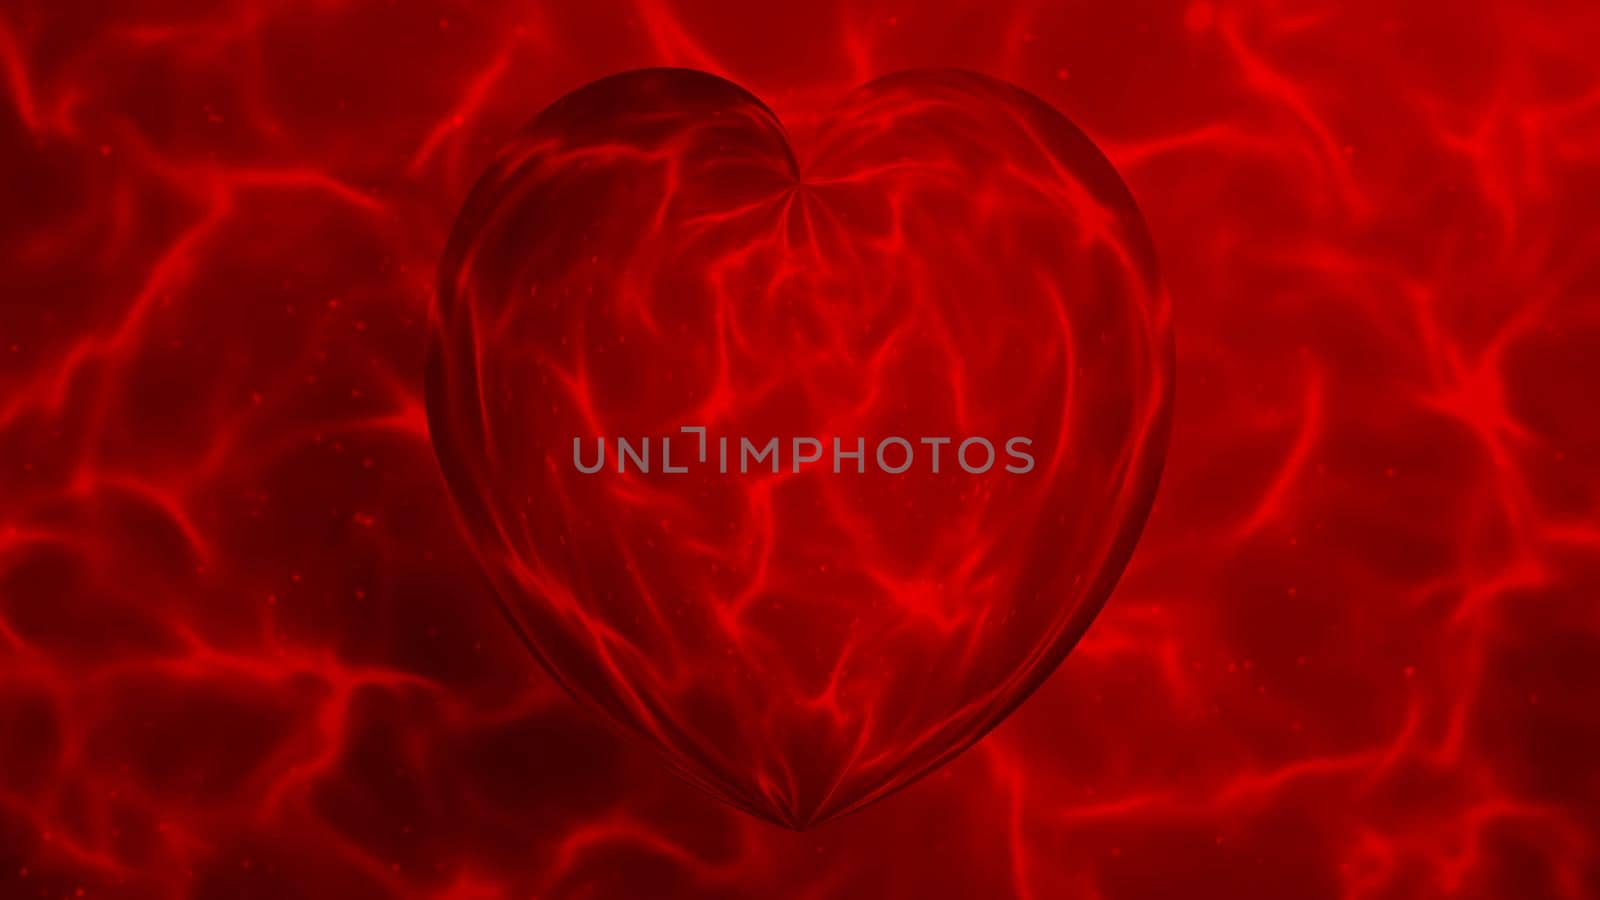 Abstract red background with a heart shape by Vvicca